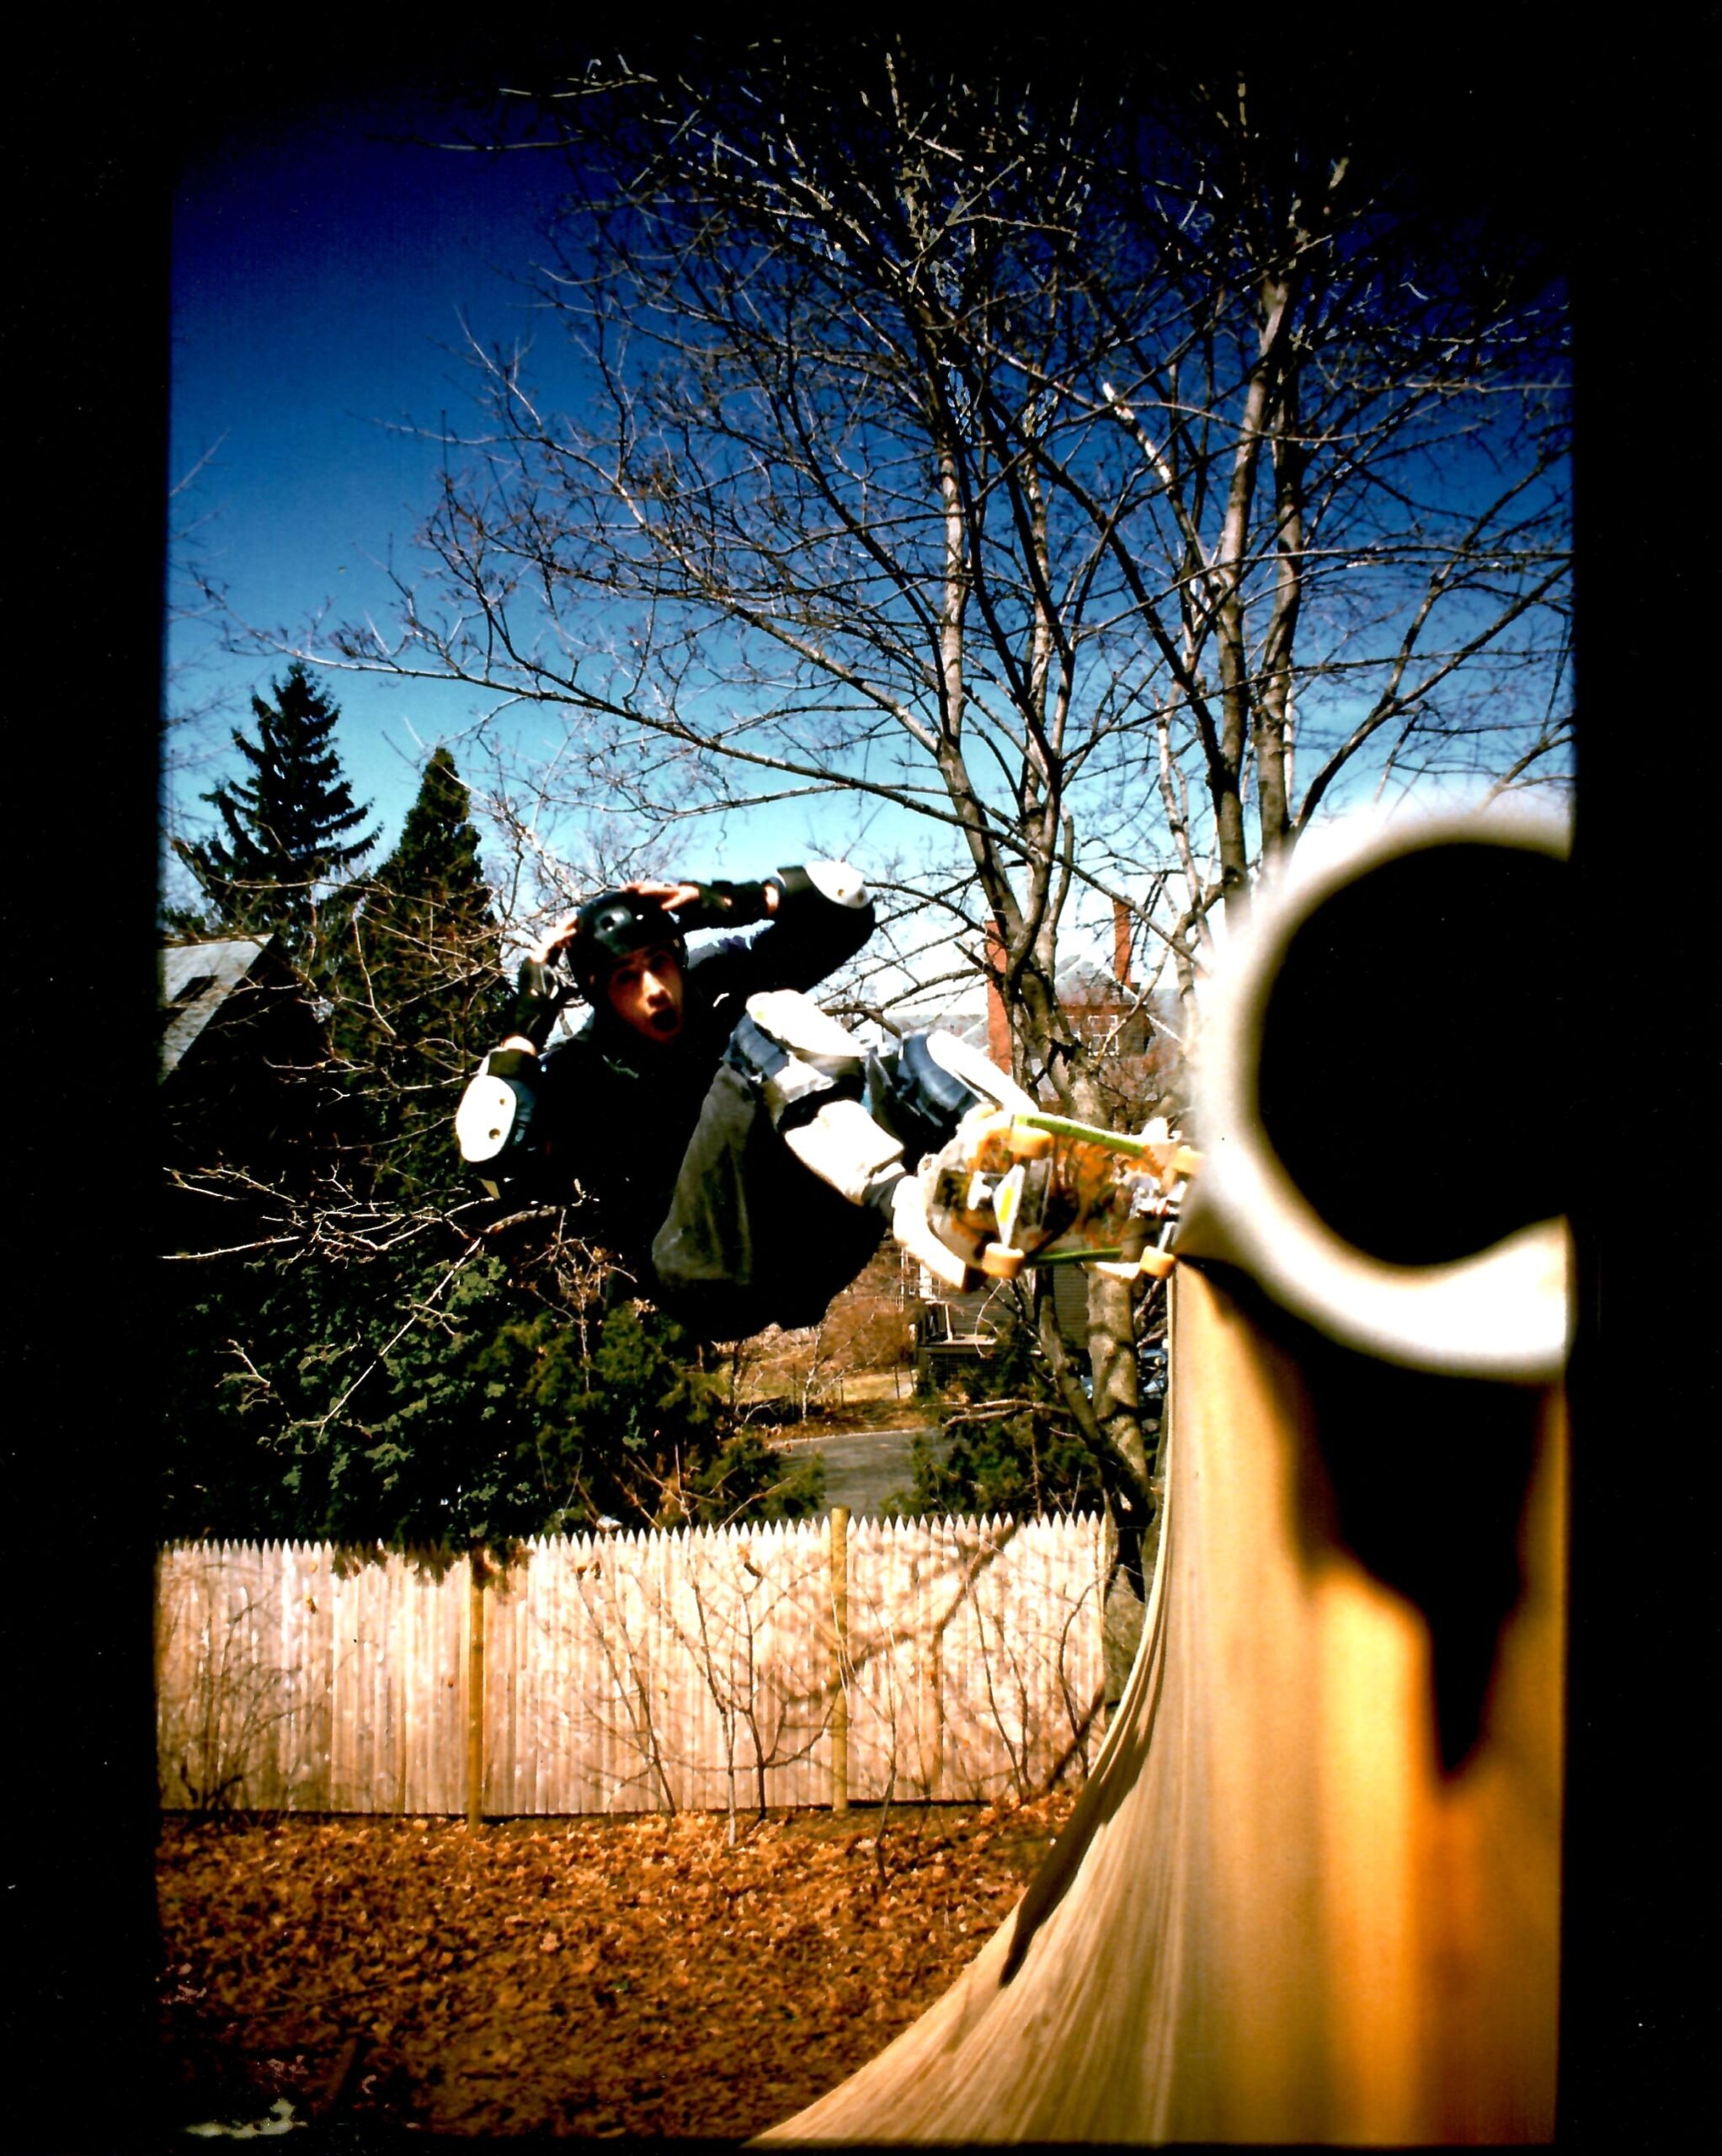 Frontside grind Newton ramp 1988 How come back in the 80s, the ramp owners never skated